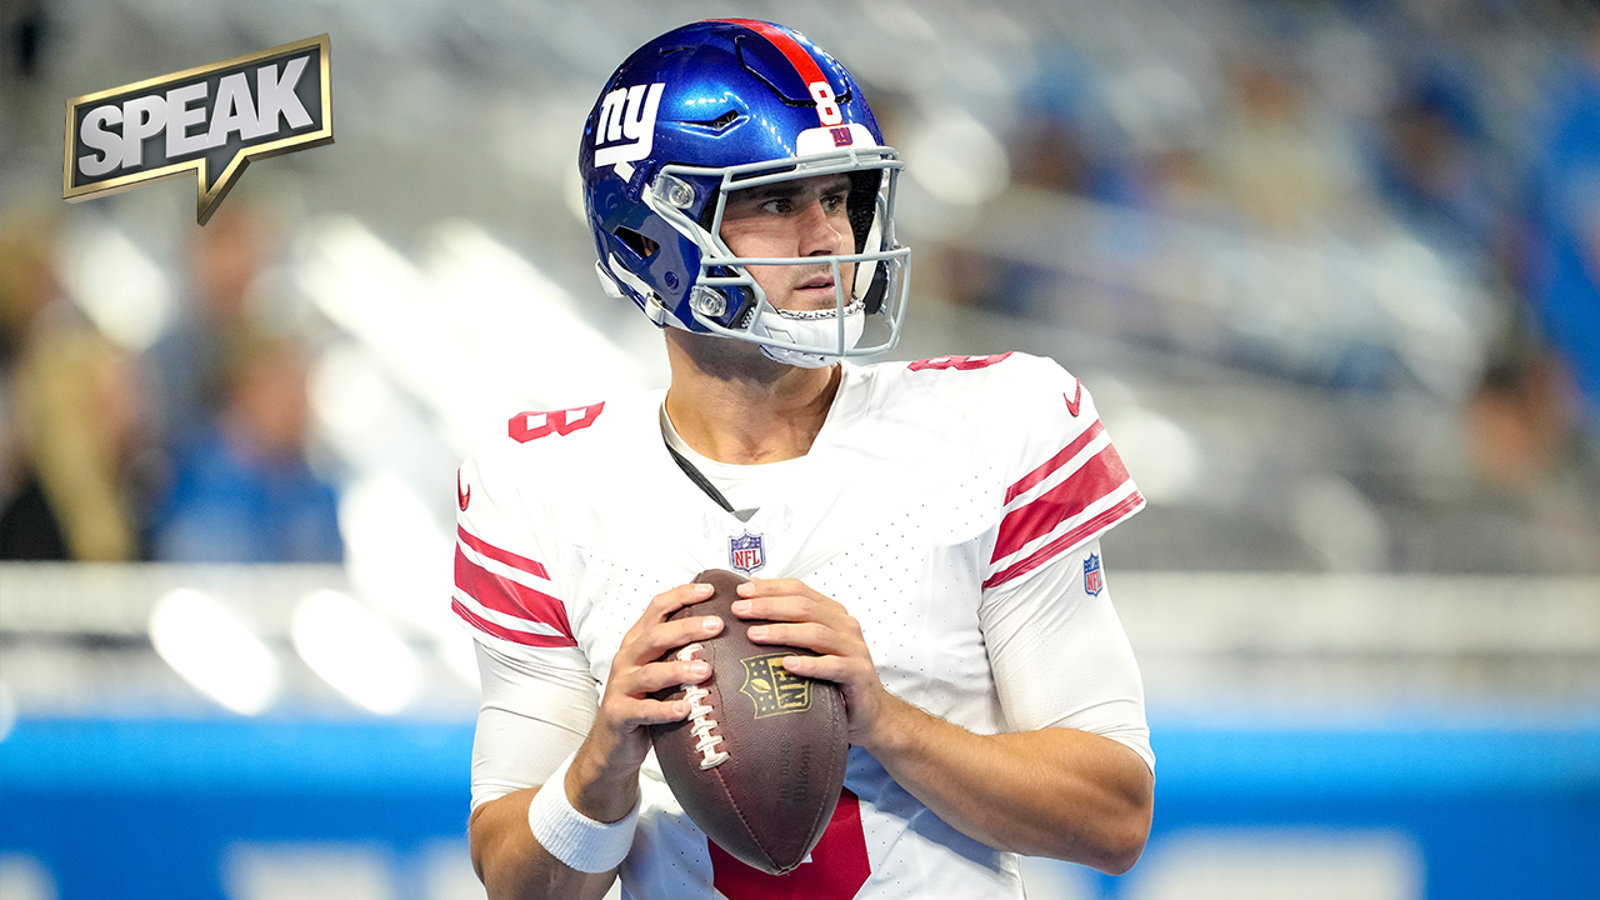 Can Daniel Jones take the Giants to the next level?